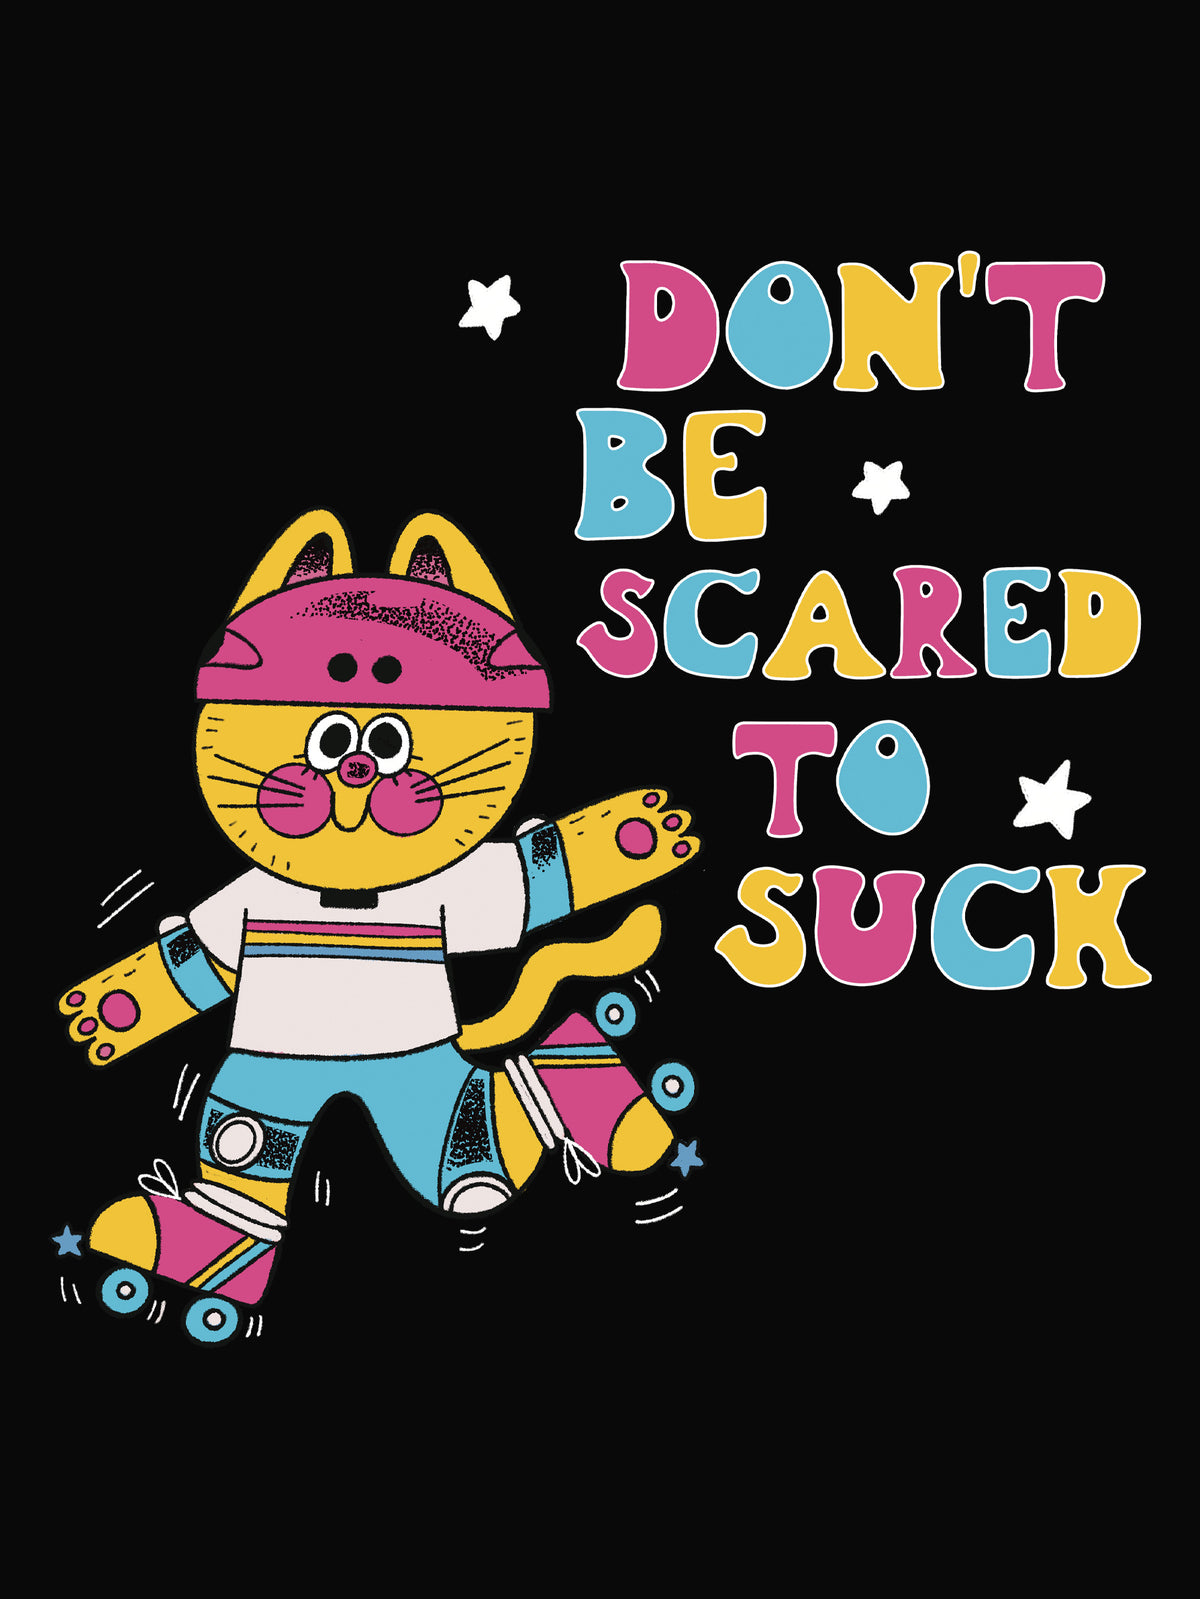 Don’t be scared to suck by Pinkgabbercat